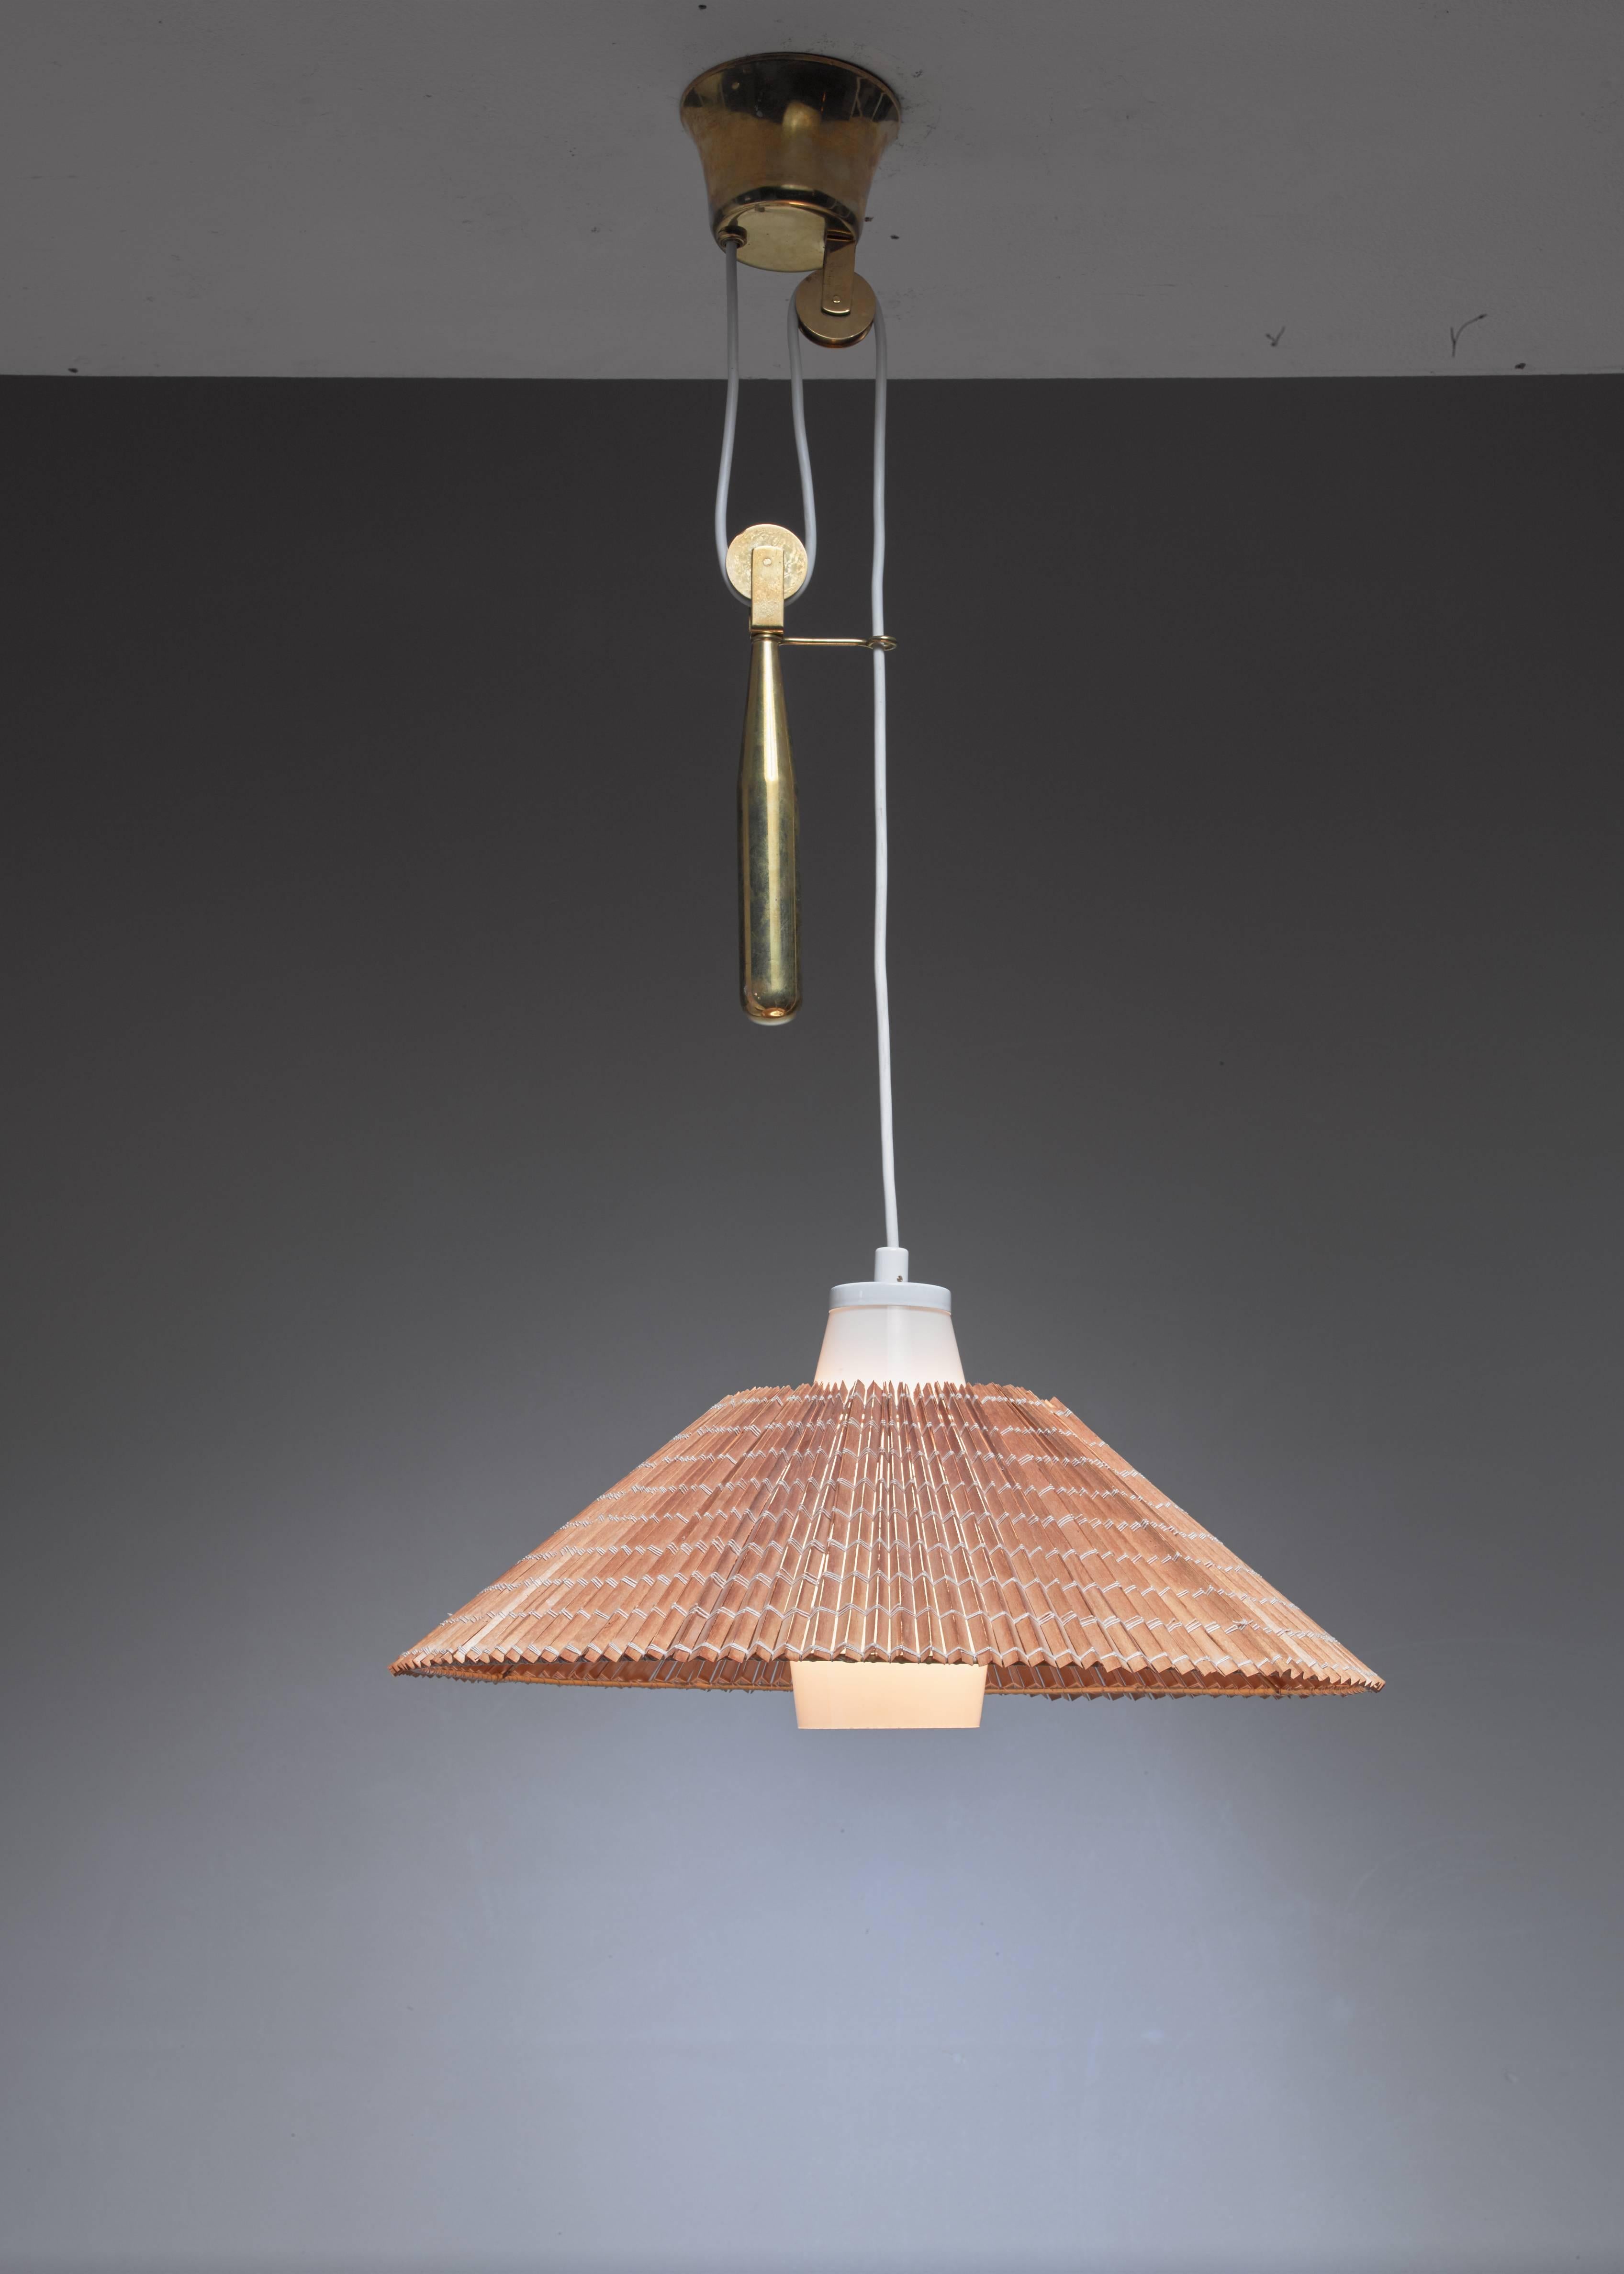 A Paavo Tynell pendant lamp with a heavy brass counterweight. The hood of the lamp is made of thin wood slats and rests on an opaline glass diffuser.